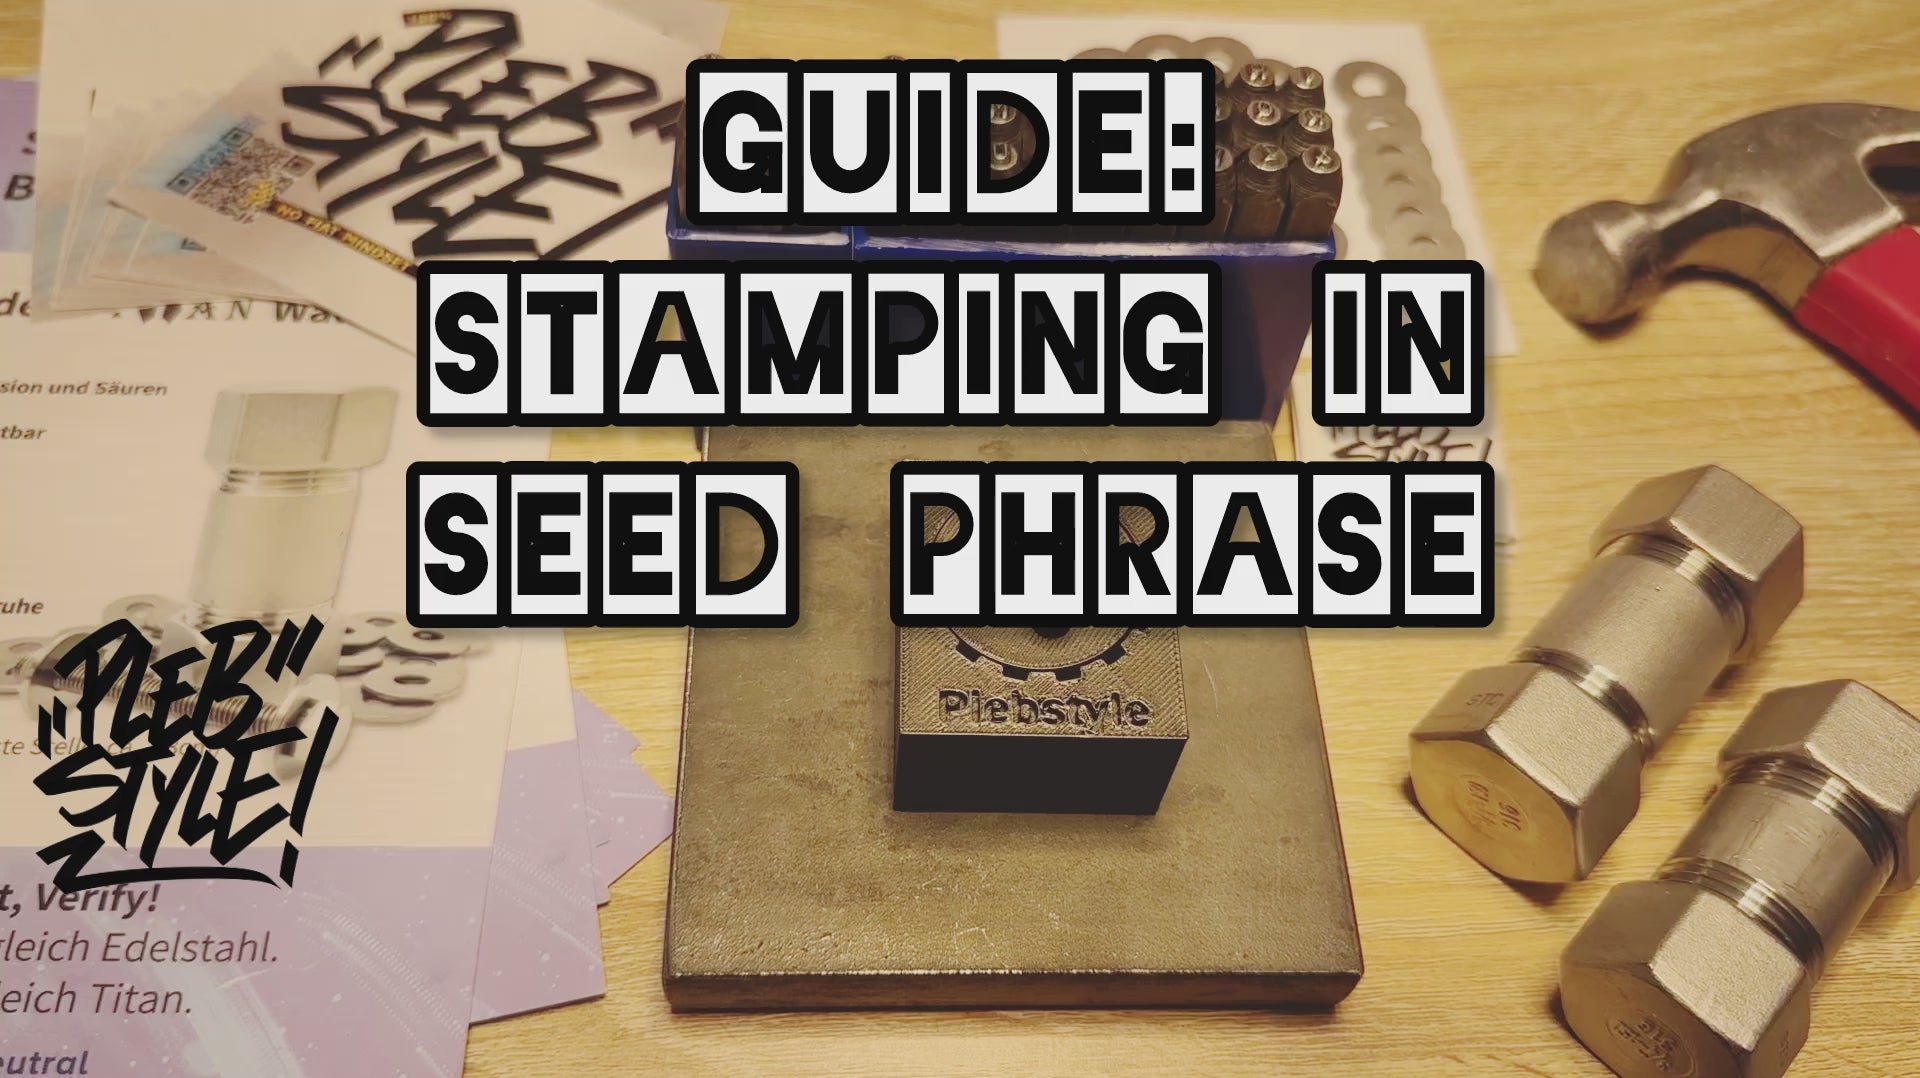 Load video: Step by step guide how to stamp in your Mnemonic Seed Phrase with Plebstyle Striking Aid/Jig